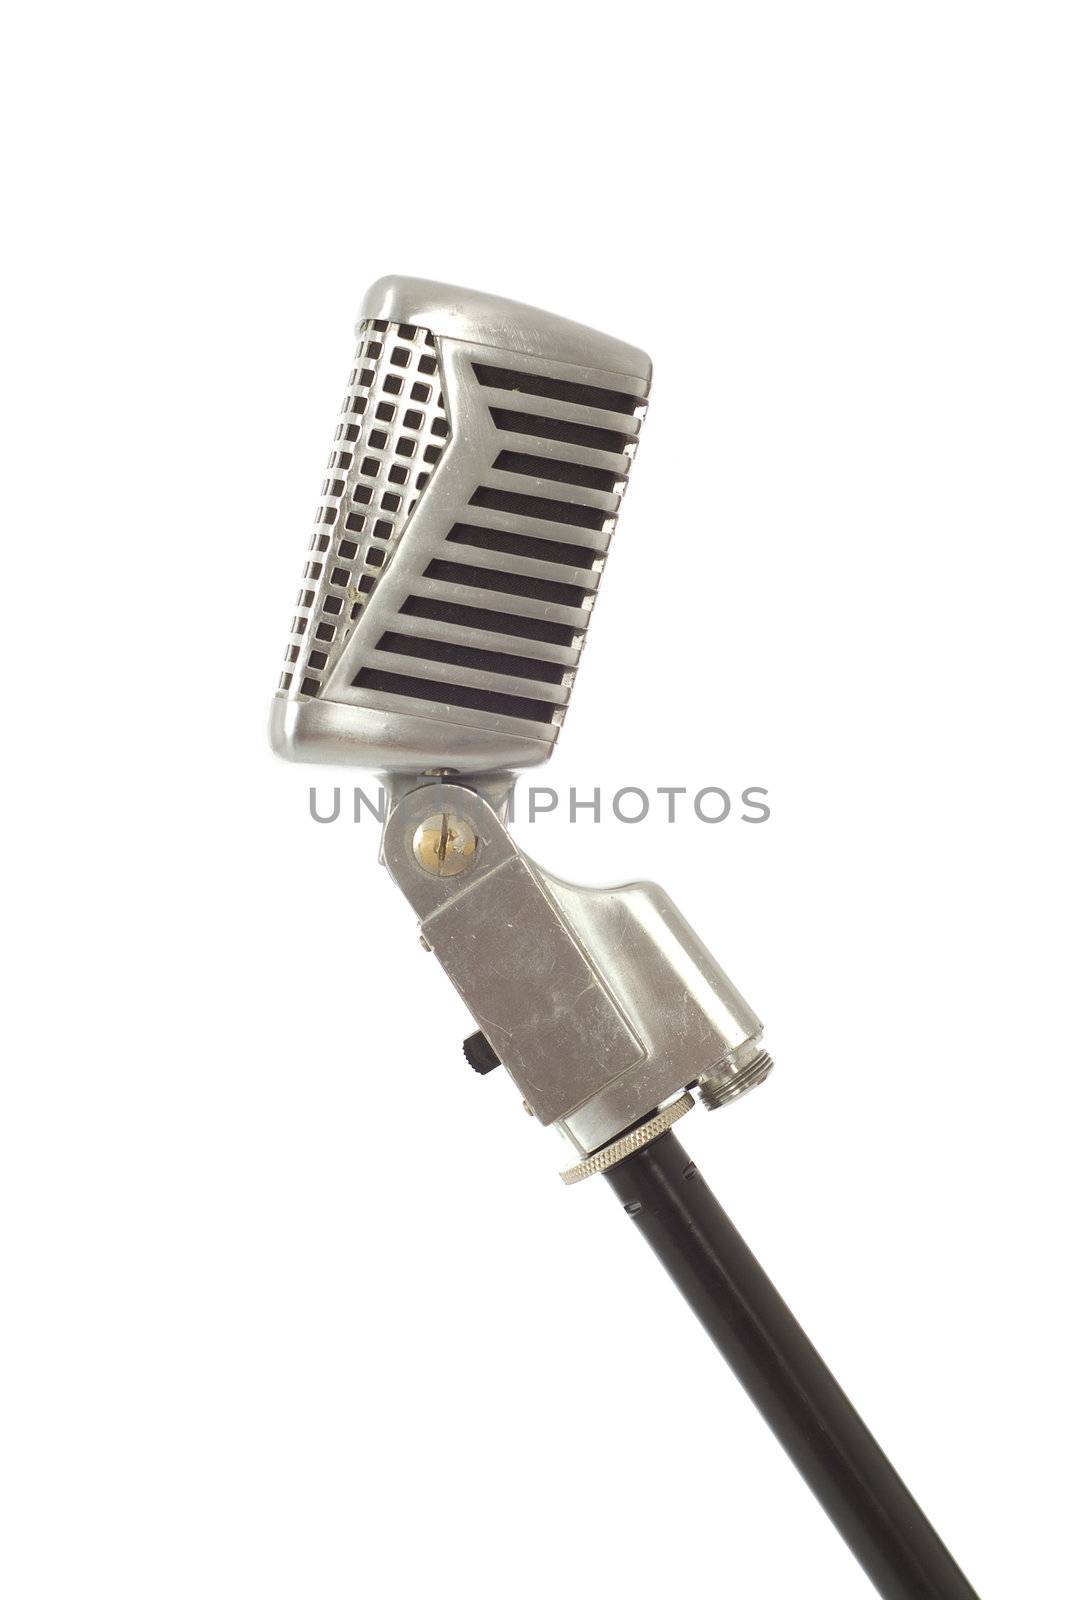 Vintage microphone by alistaircotton